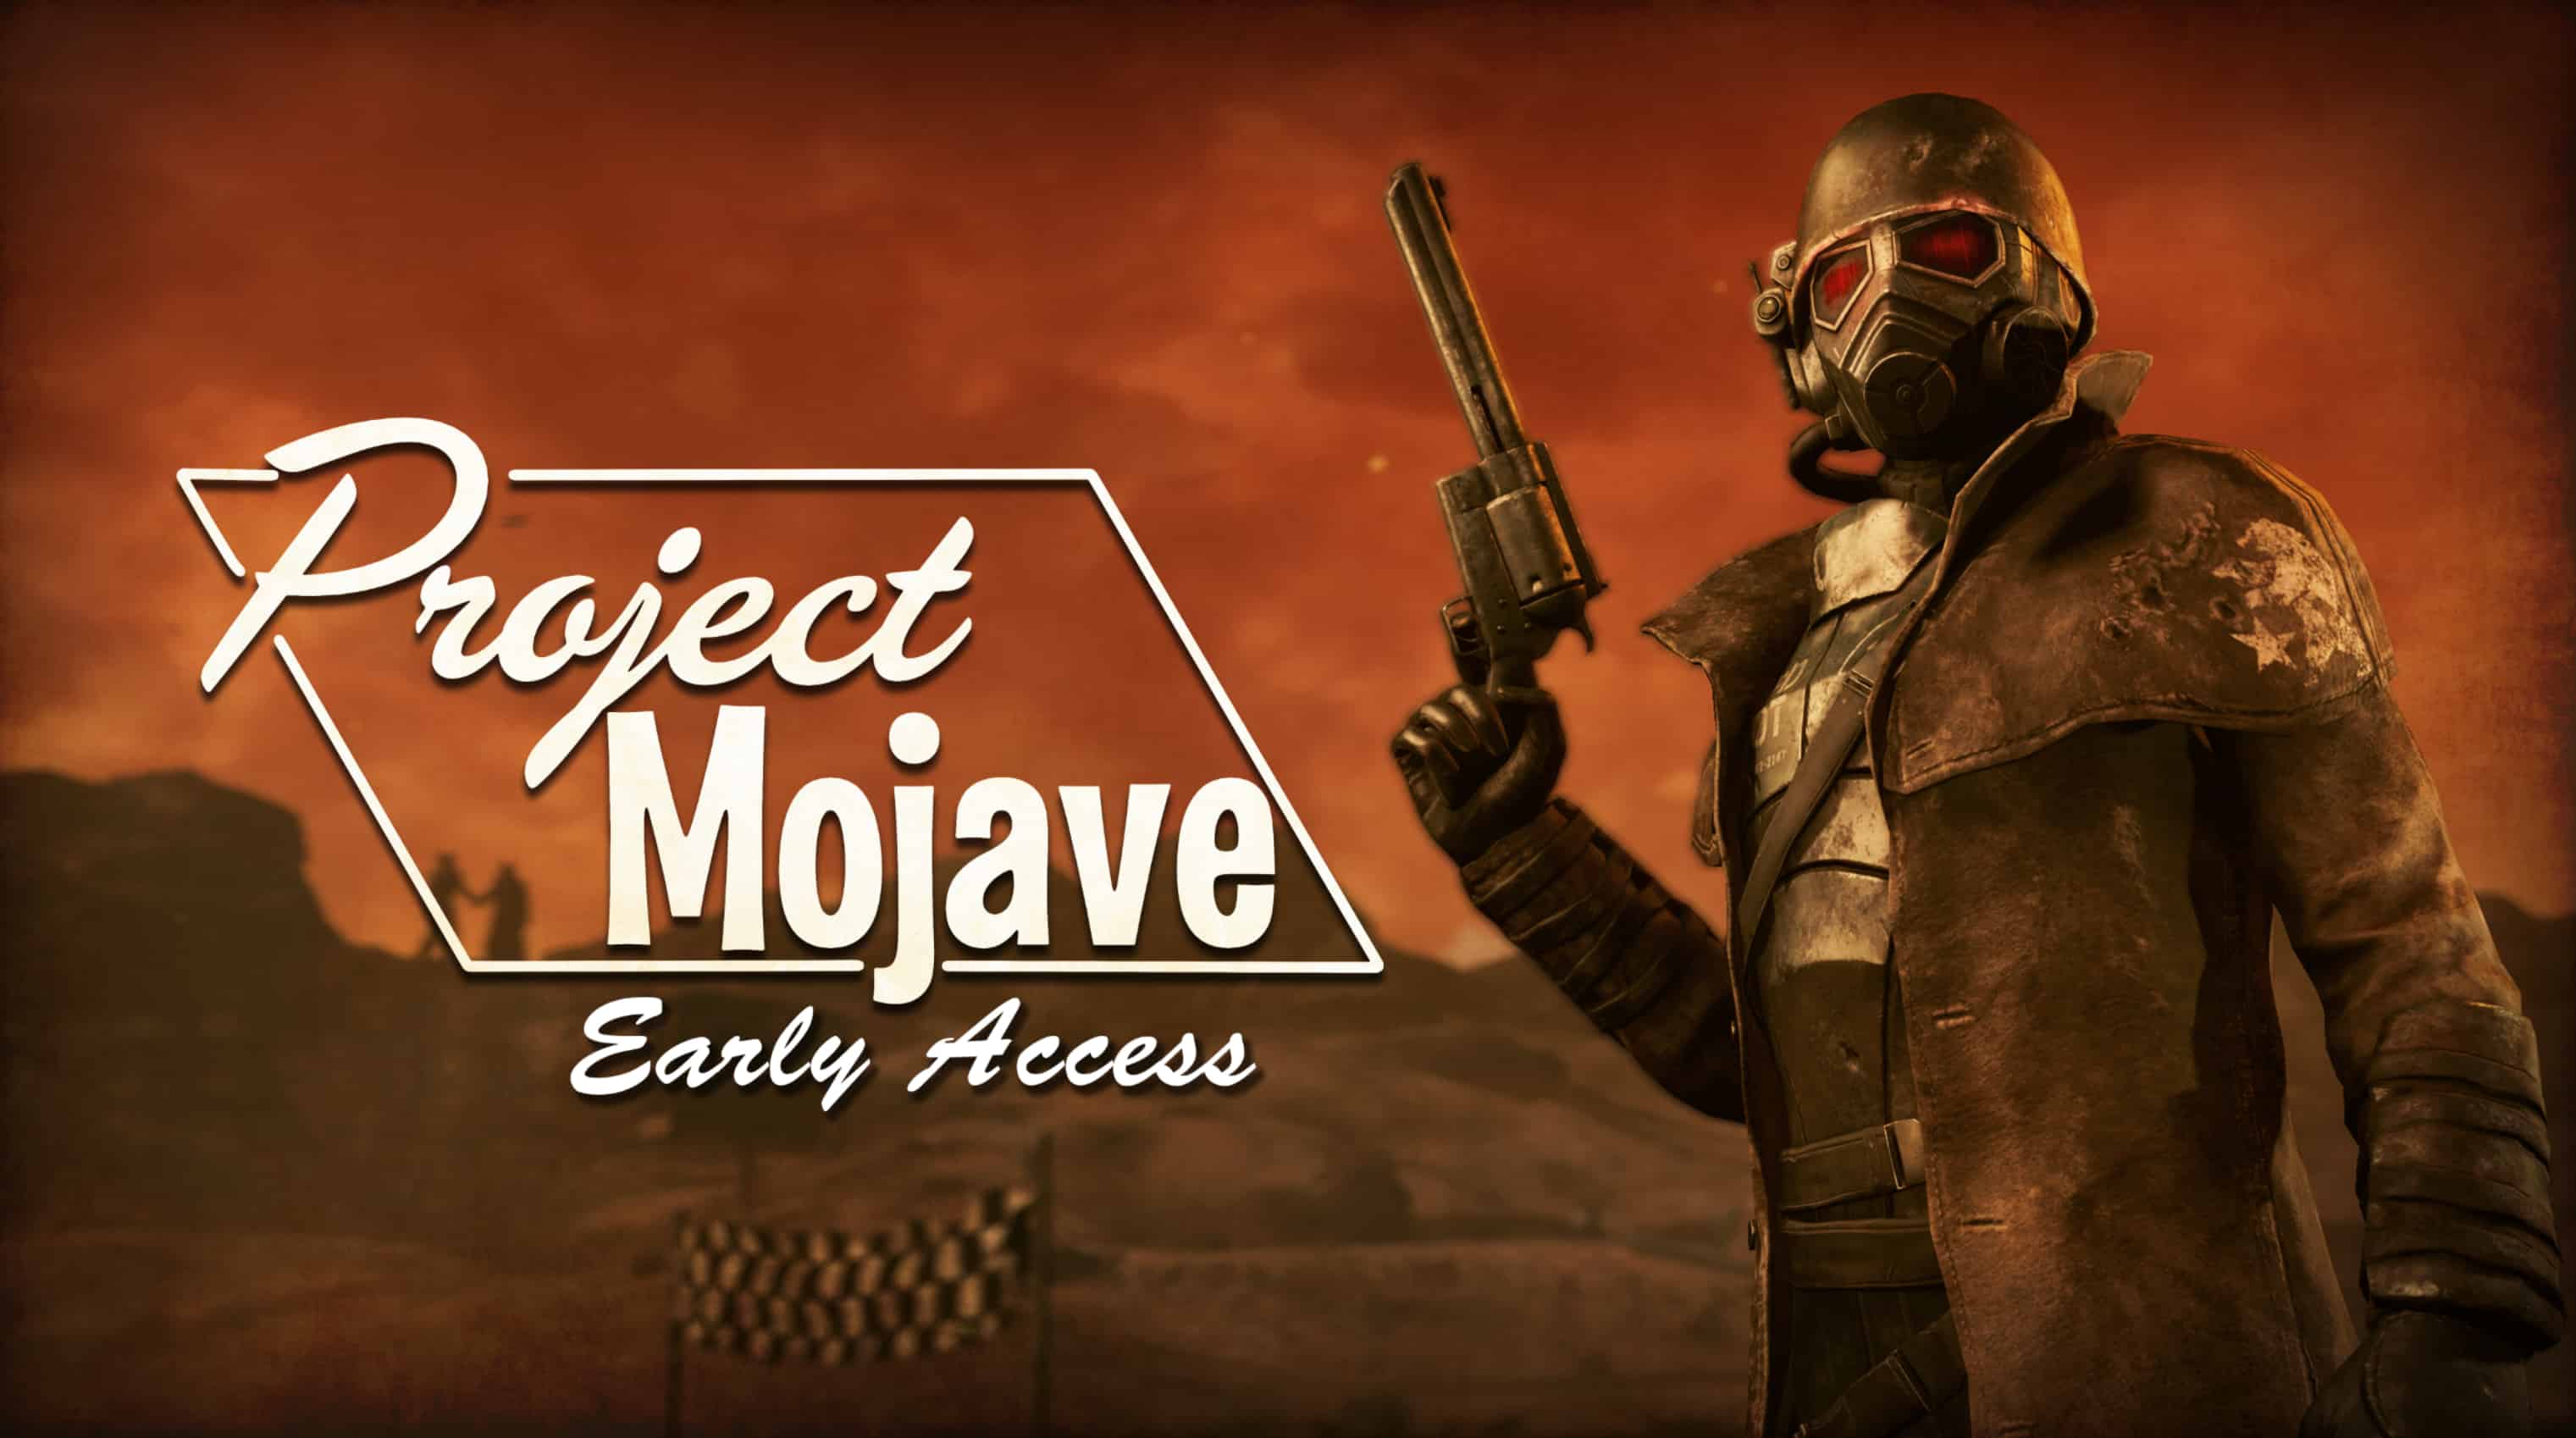 One Modder's Quest: Recreate Parts of Fallout New Vegas Inside